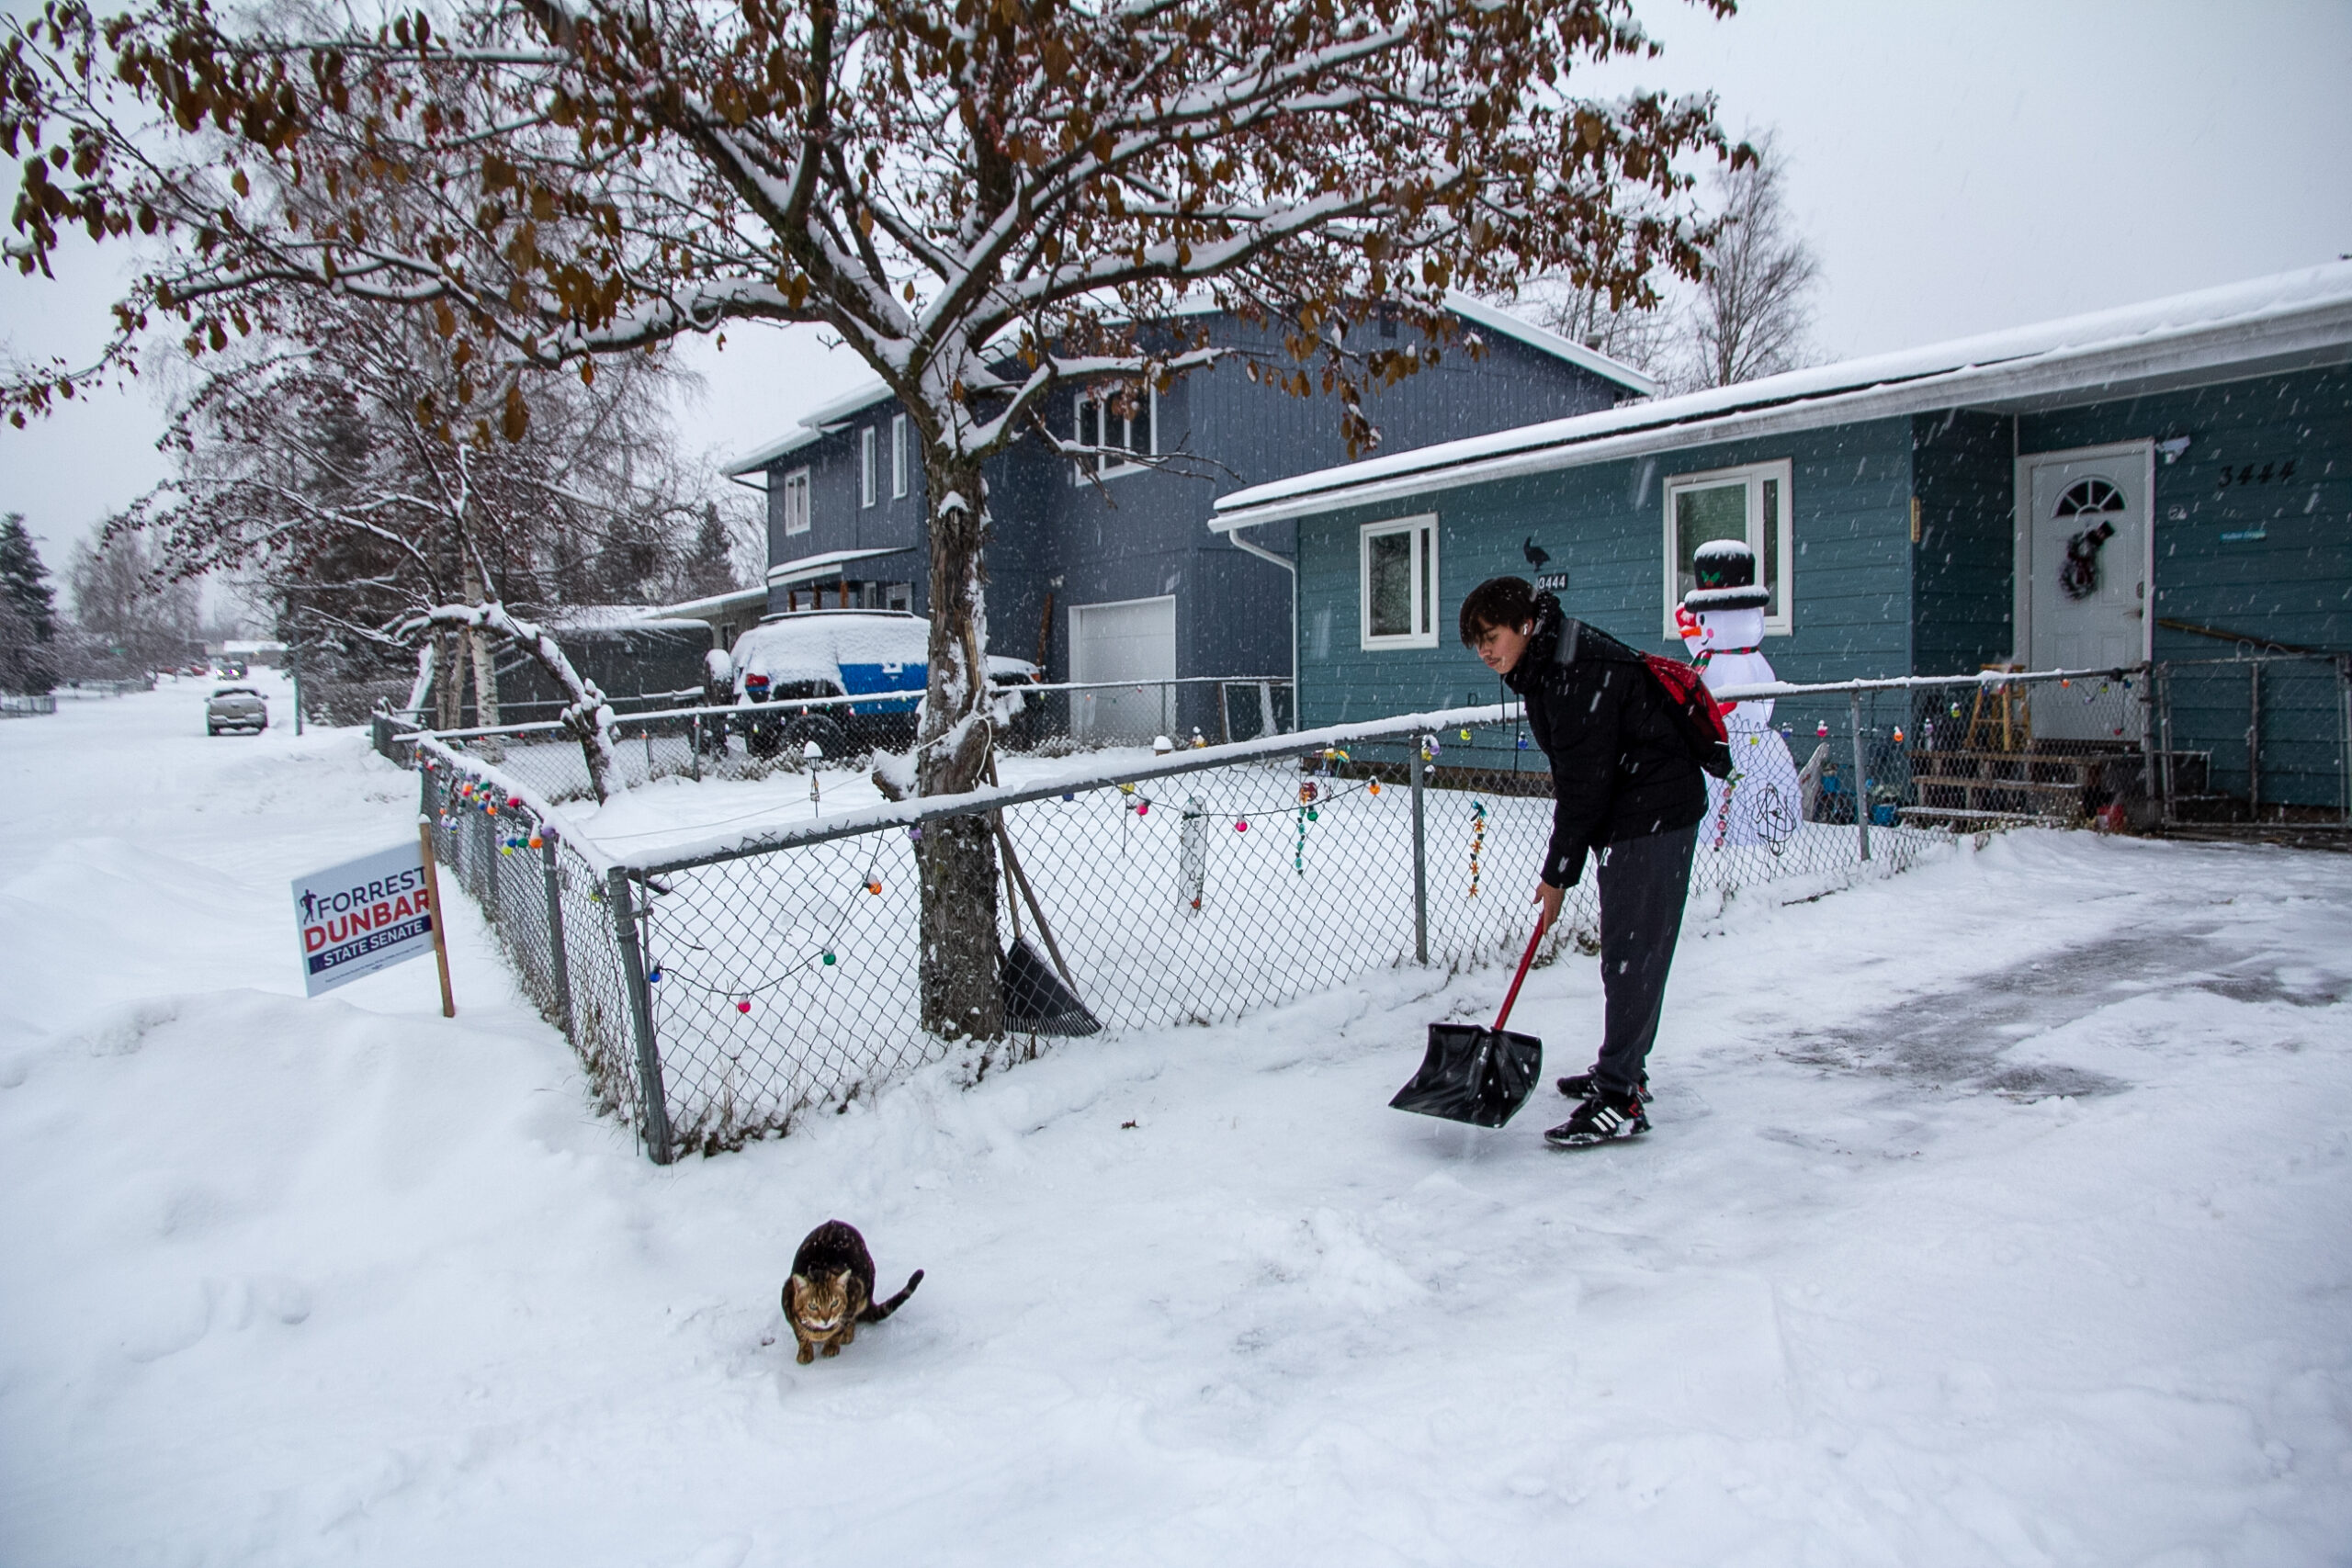 A boy shovels snow from a driveway while a cat is perched where the sidewalk meets the driveway.